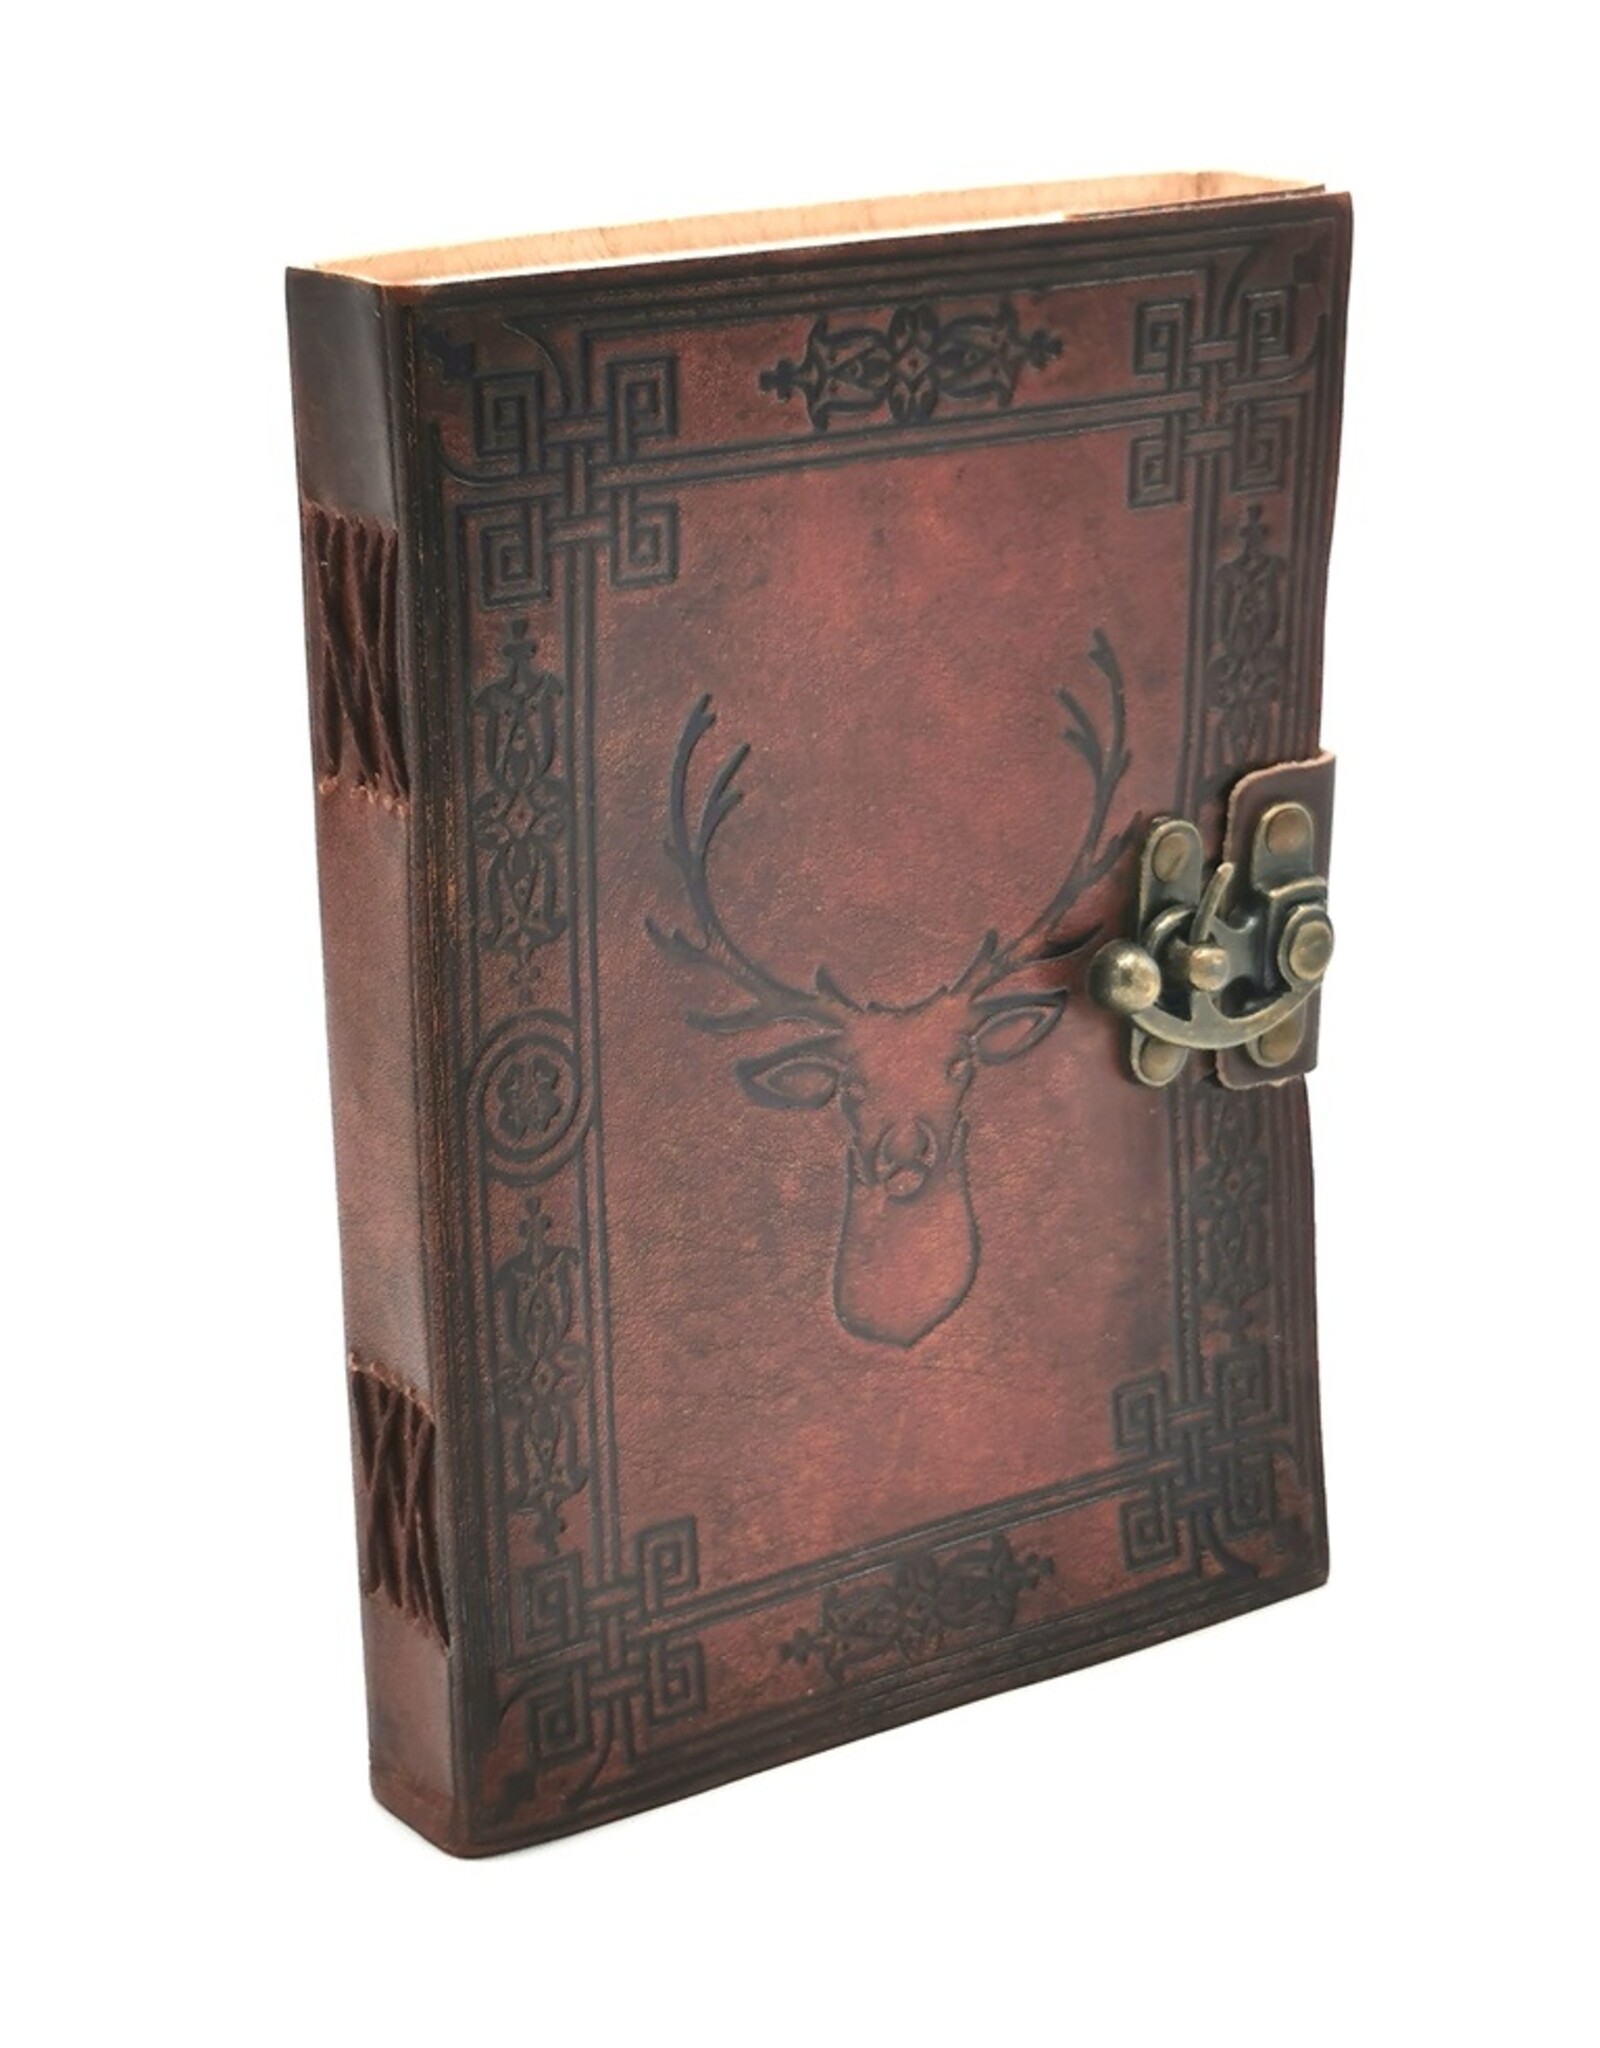 AWG Miscellaneous - Leather Journal with Embossed Stag 20cm x 15cm